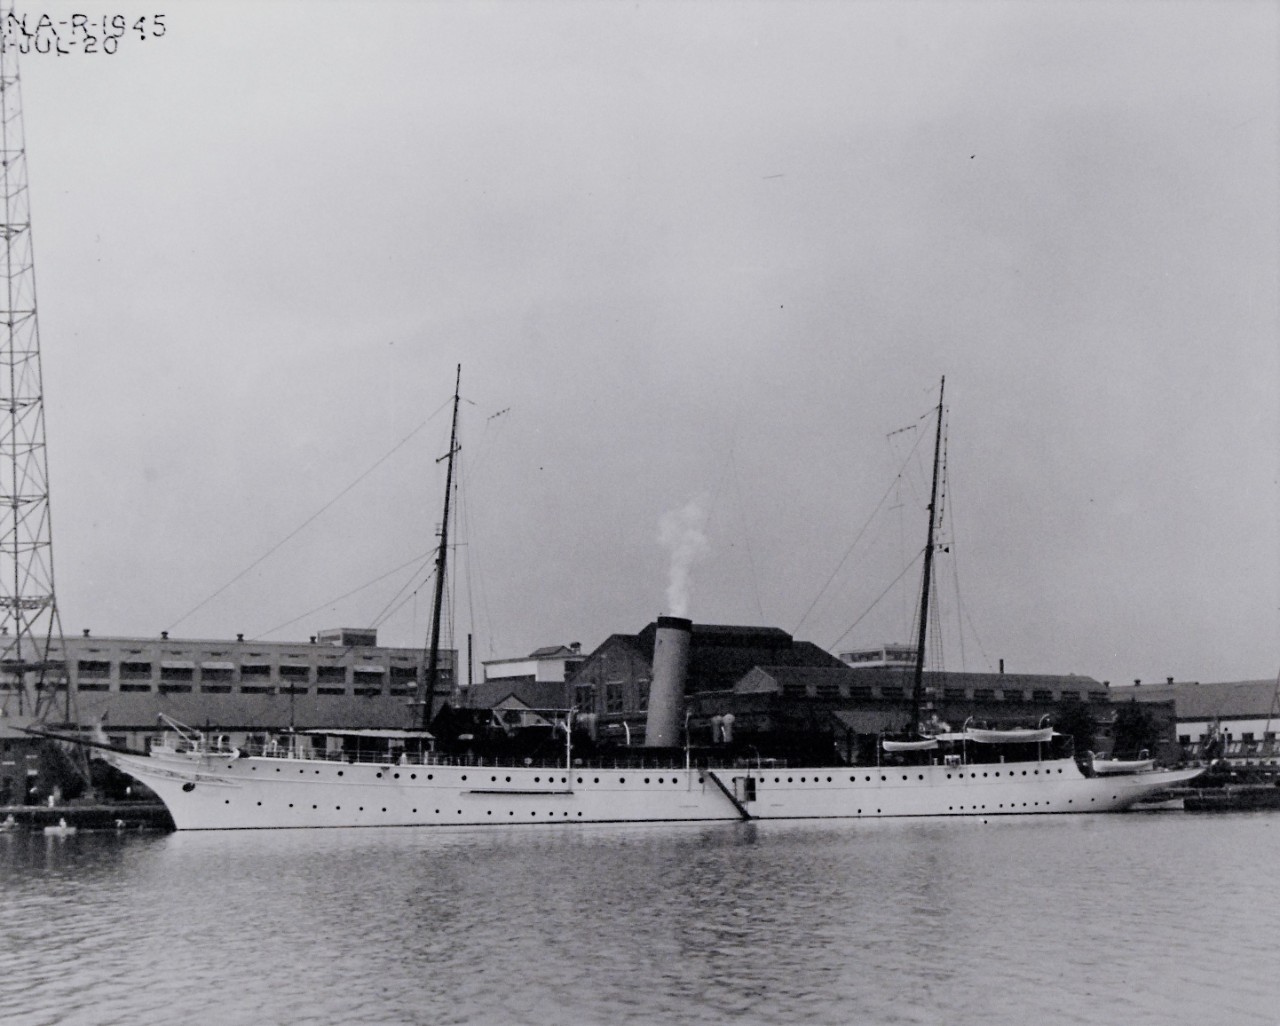 80-G-457032:   Presidential Yacht, USS Mayflower (PY-1), Washington Navy Yard, 1920.   Broadside of President Harding’s yacht while at the Washington Navy Yard, Washington, D.C., July 31, 1920.  Official U.S. Navy Photograph, now in the collections of the National Archives.   